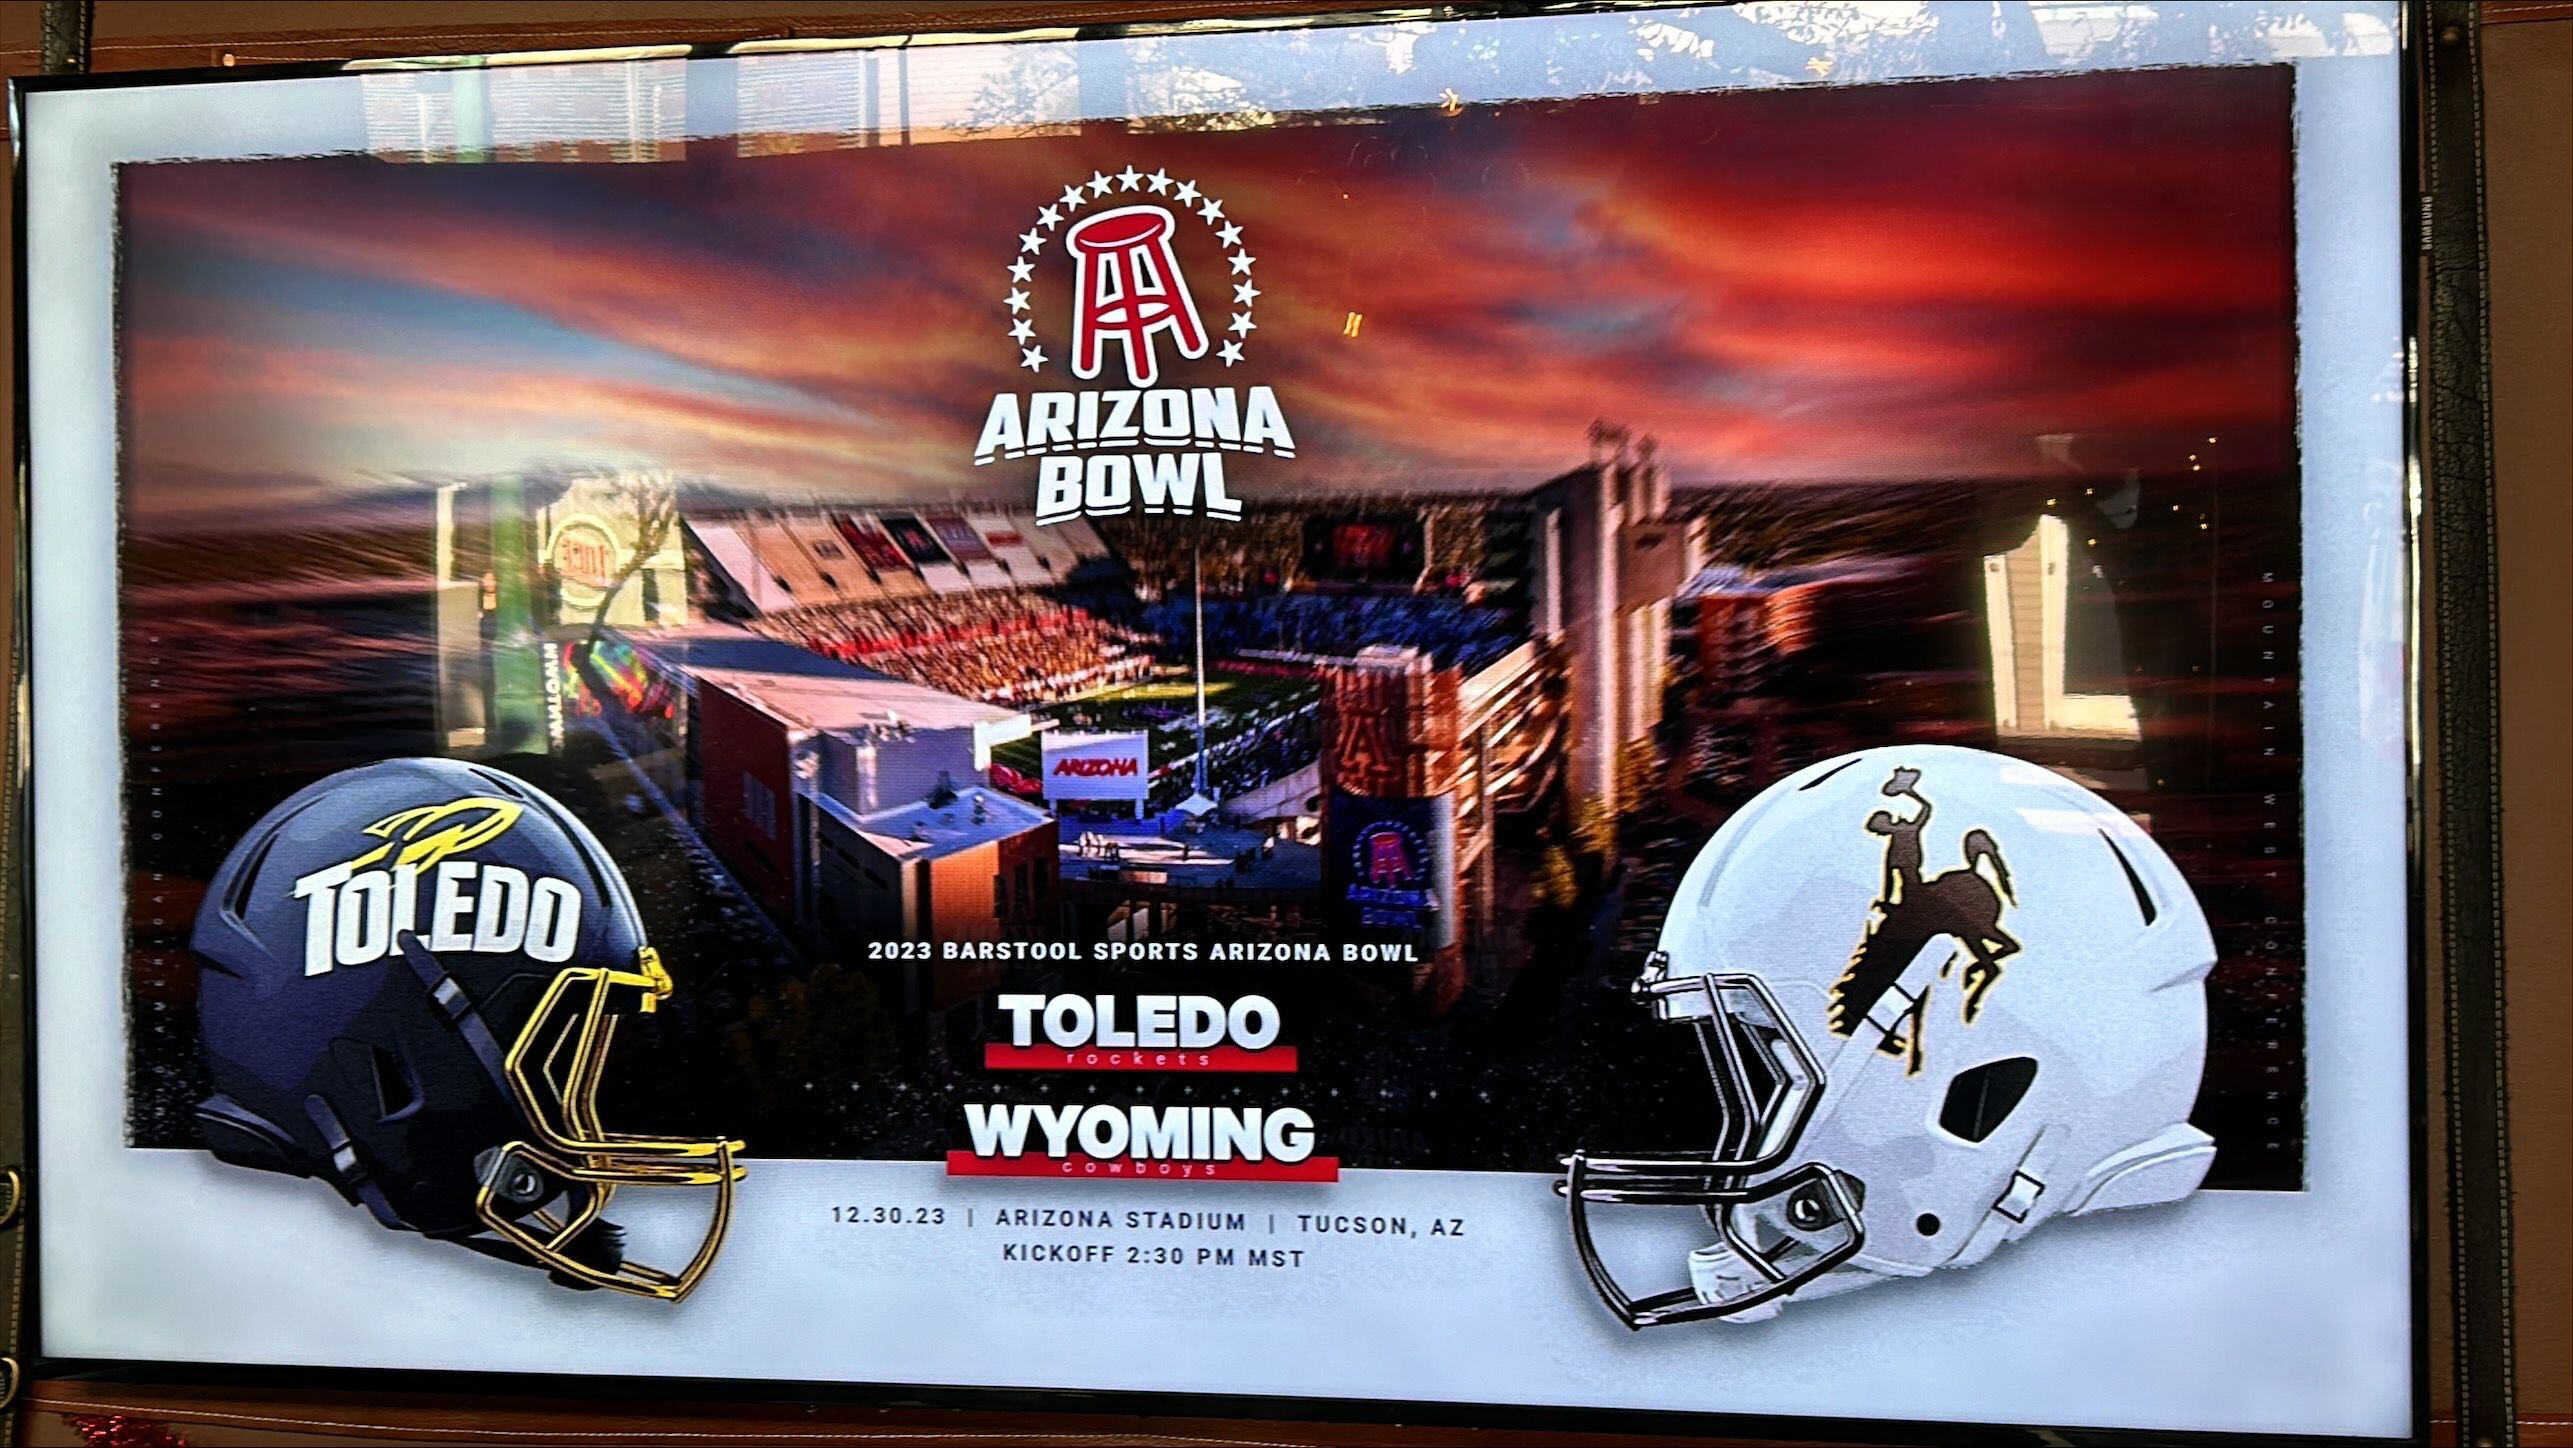 The Barstool Sports Arizona Bowl is more than just a football game for